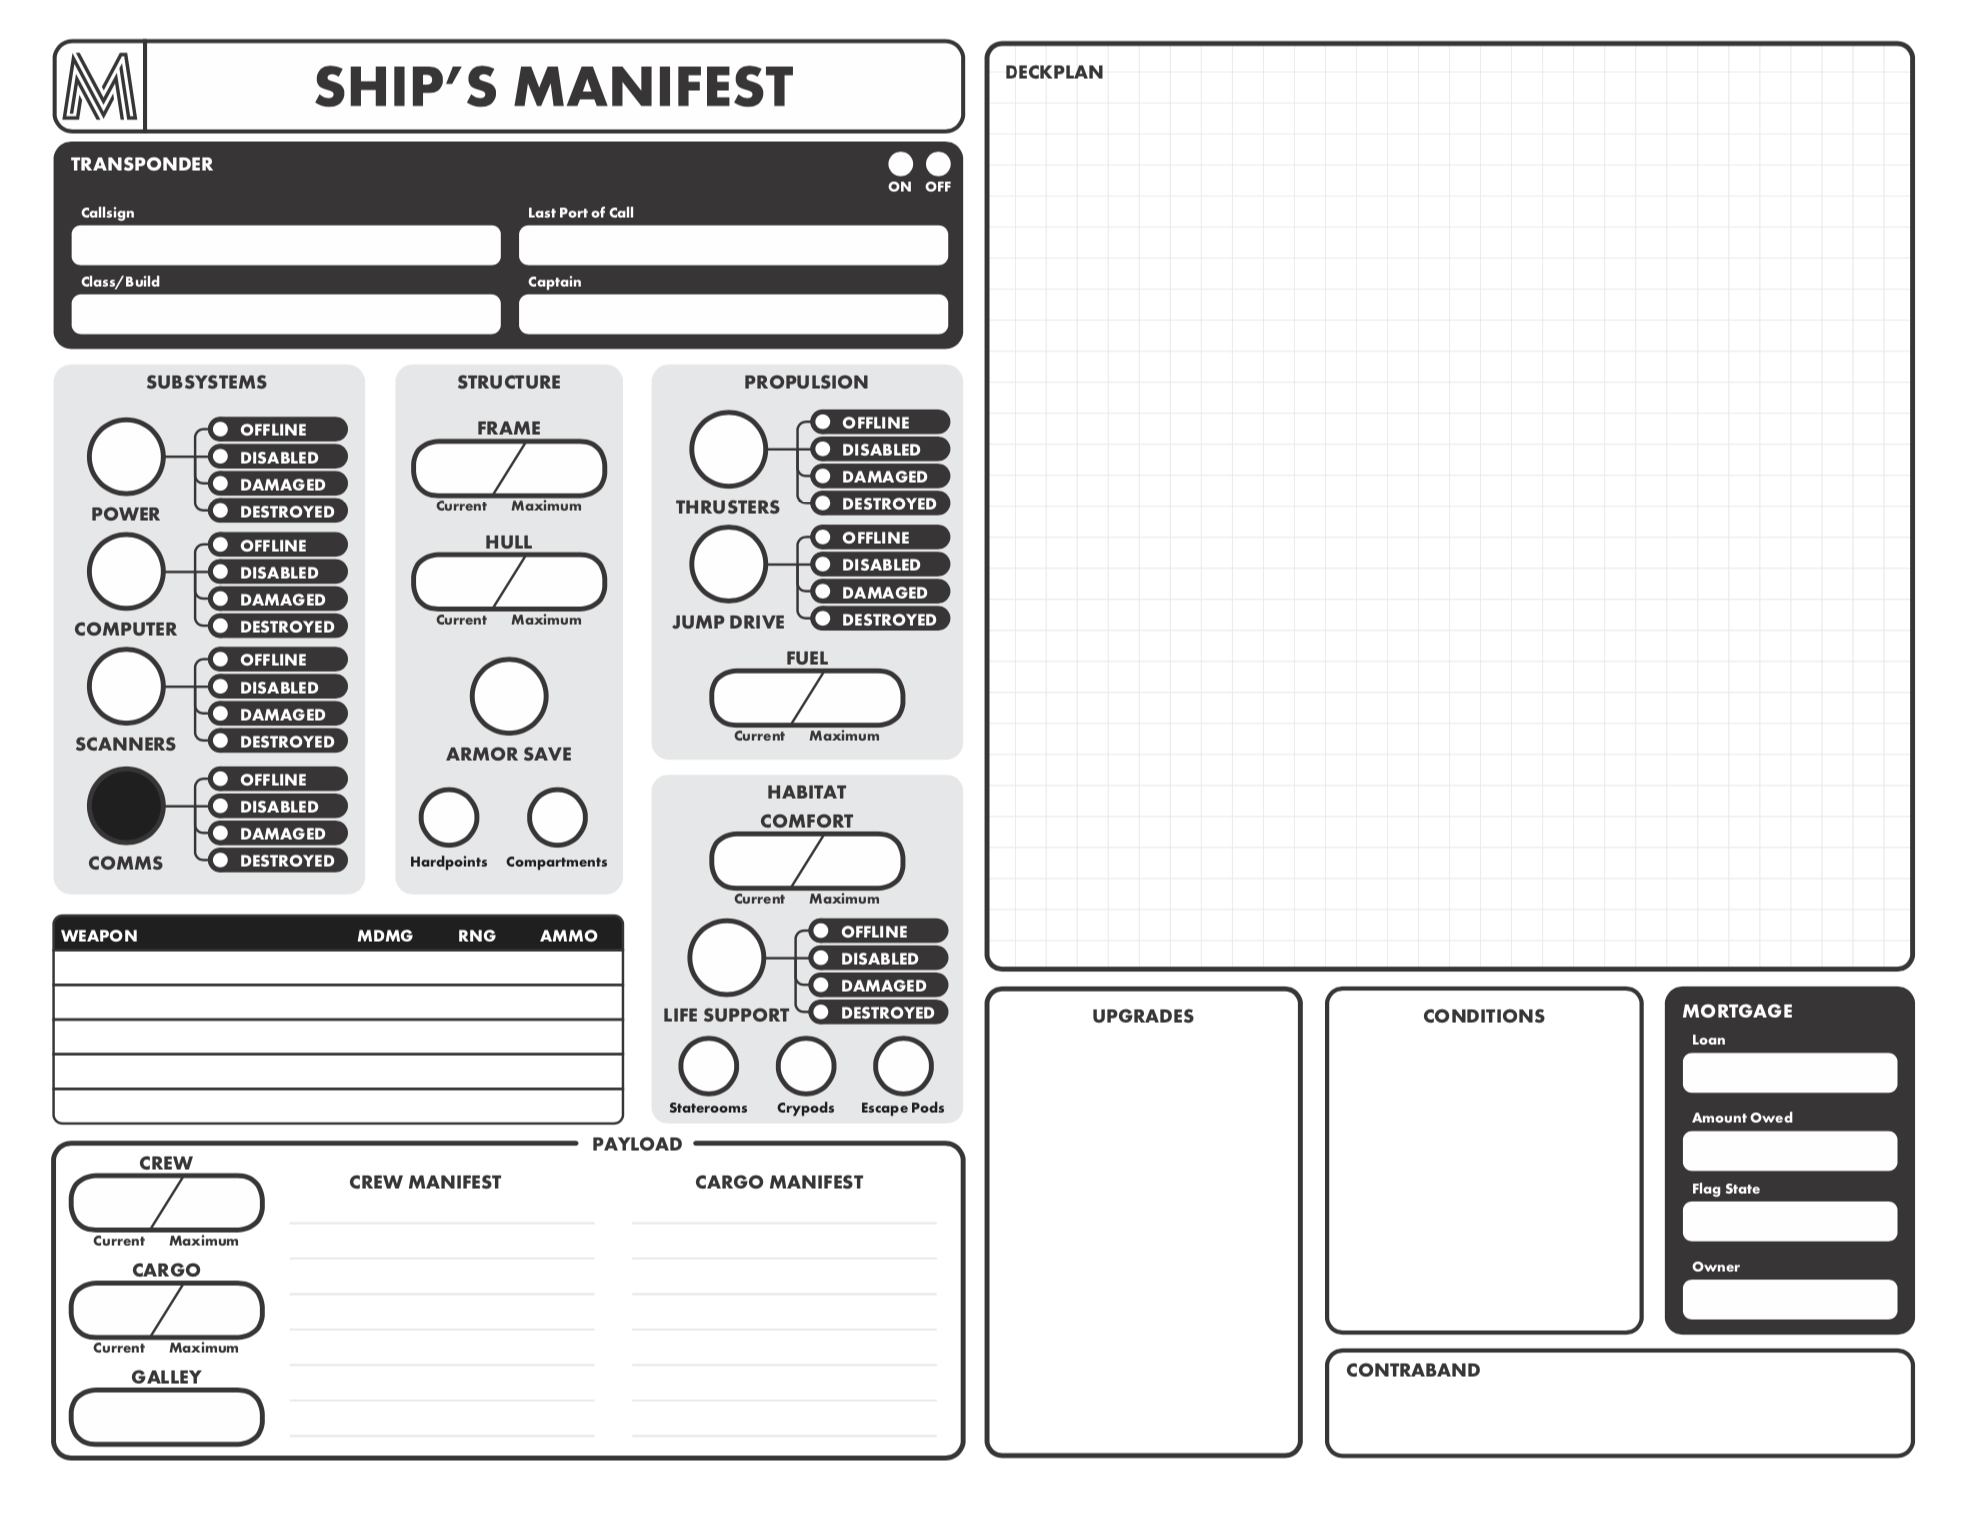 Work in progress. A brand new Ship Manifest. Coming soon in the Mothership Boxed Set